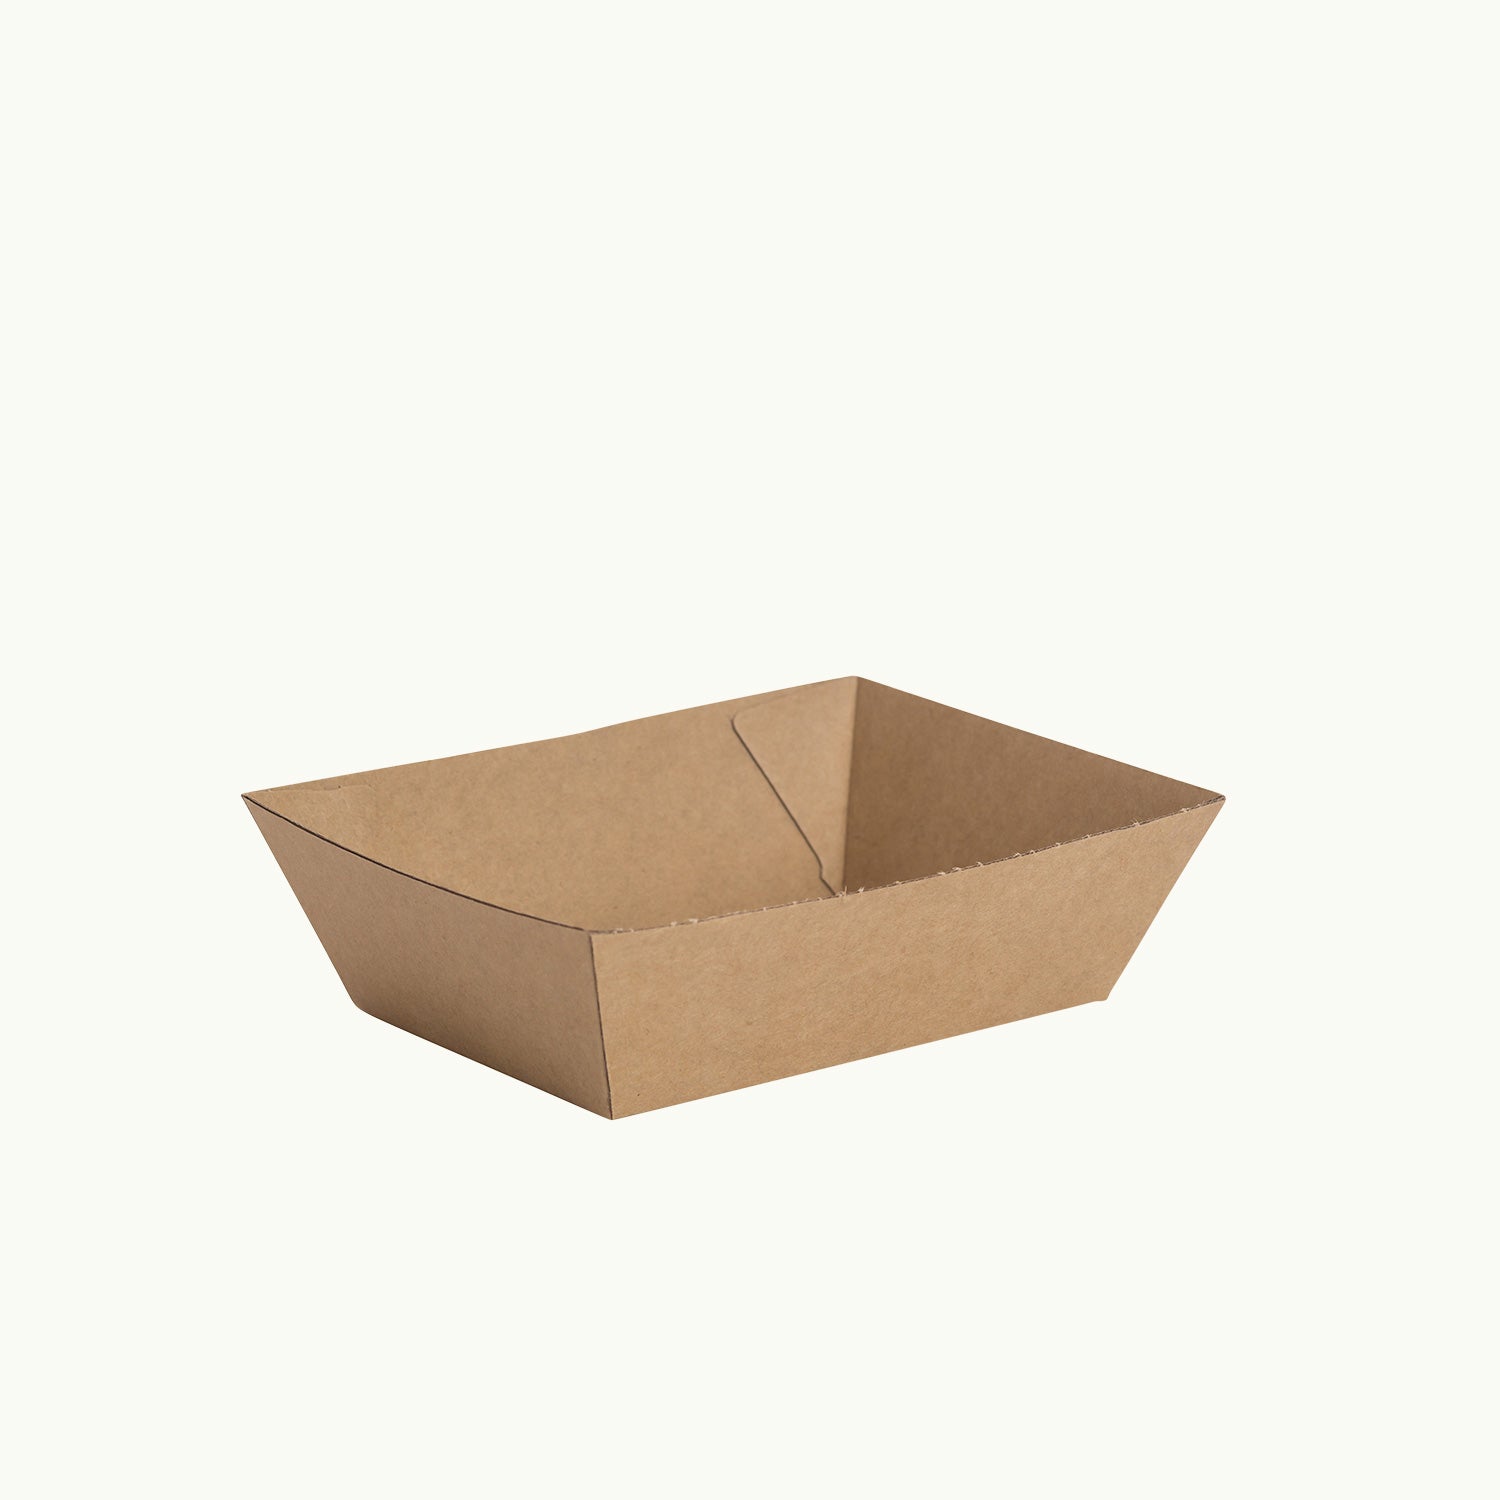 Ecoware kraft tray. Compostable paper packaging.